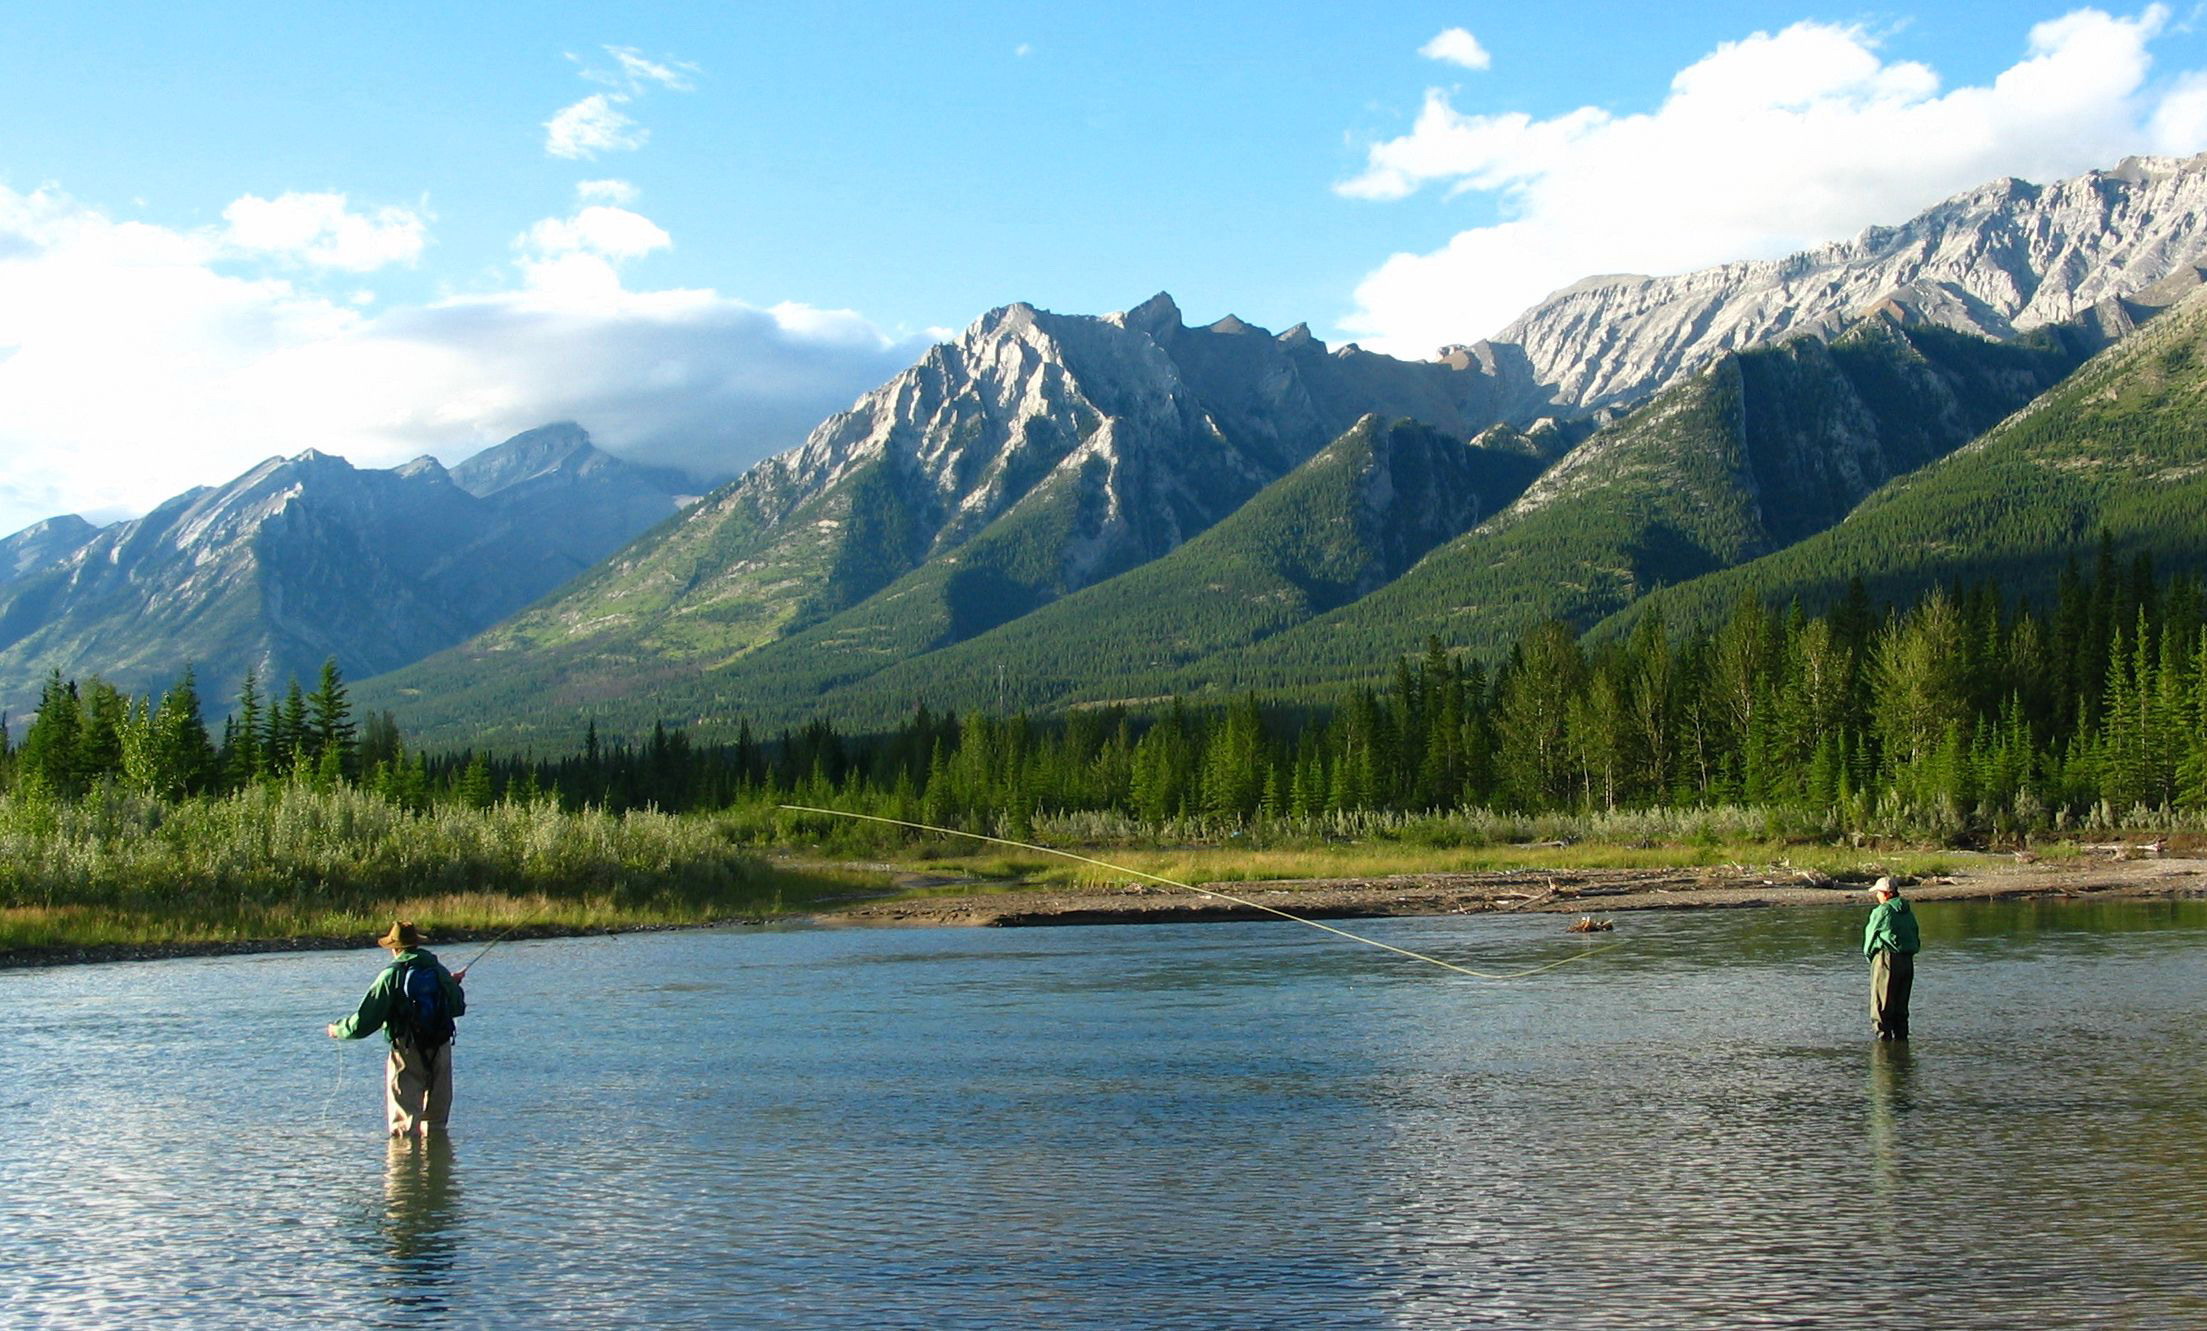 Banff Fly fishng Guides: Welcome to guided fly fishing trips near Banff  along the Bow River. Hawgwild Fly Fishing Guides guide high end fly fishing,  spin fishing along the Bow River. Guided